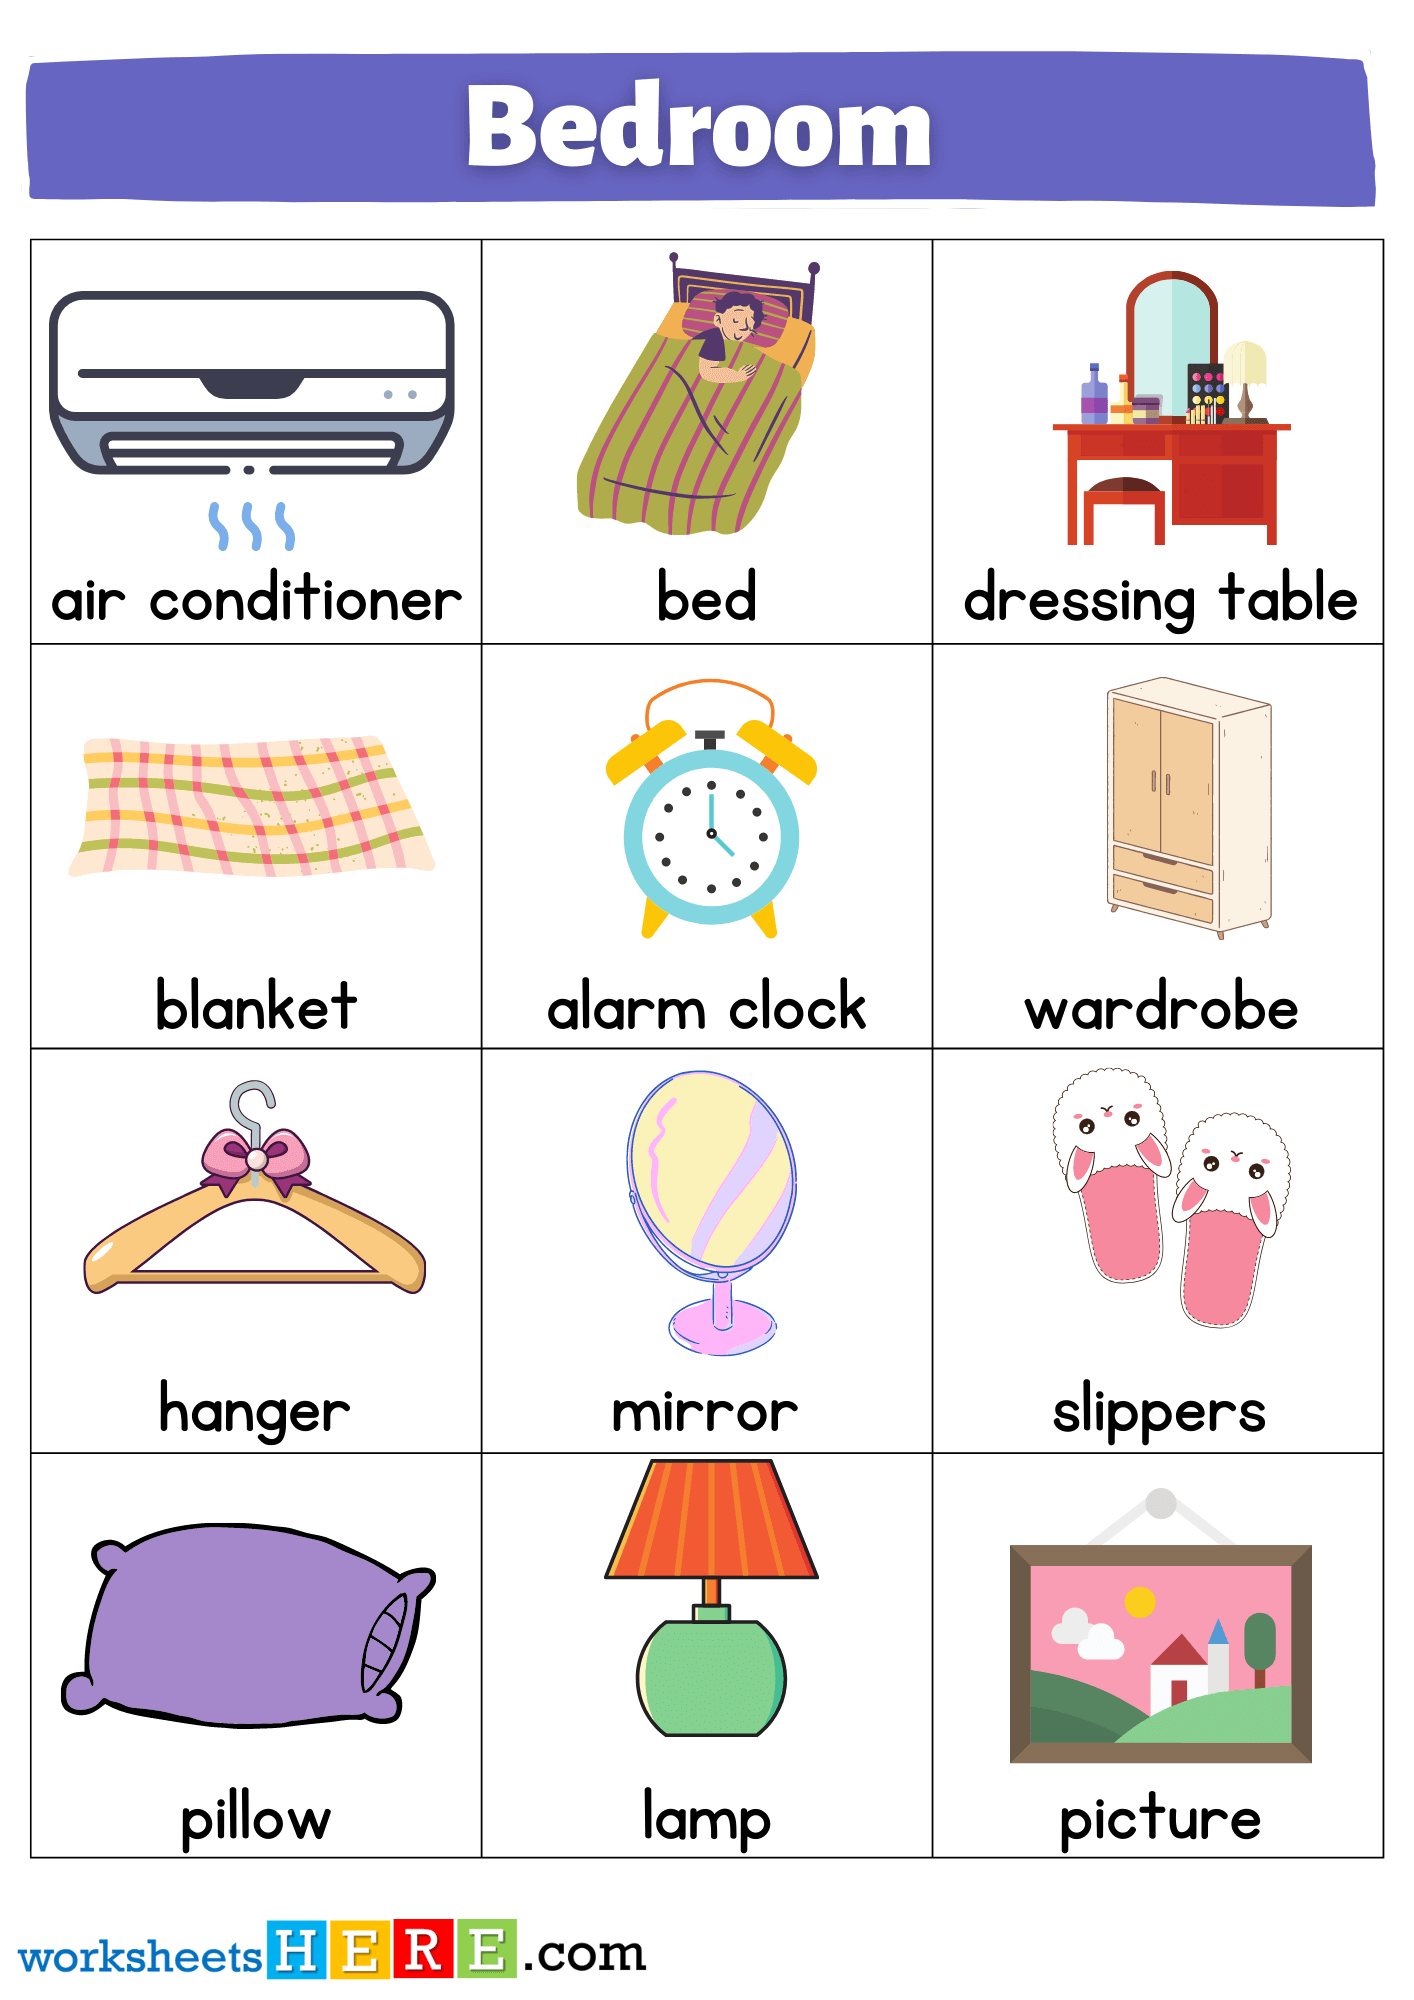 Bedroom Objects Names with Pictures Flashcards PDF Worksheets For Students